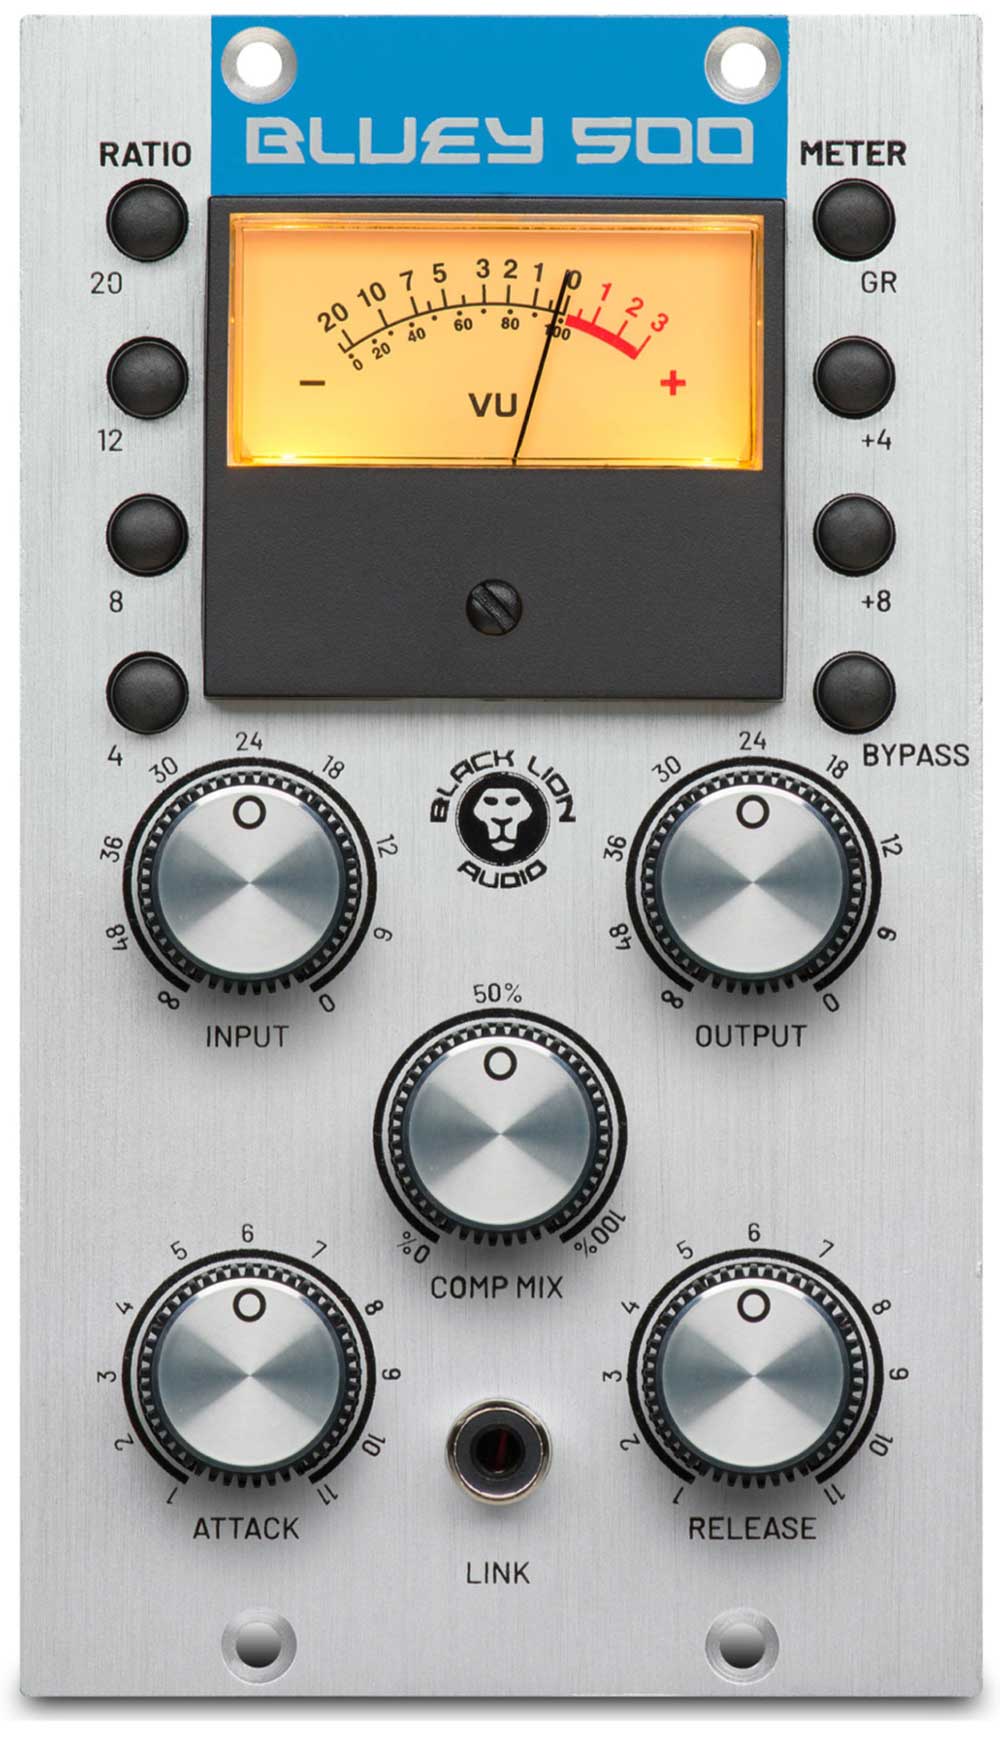 Black Lion Audio has released the Bluey 500, a 500-series version of Chris Lord-Alge's heavily-modified 2U "Bluey" compressor